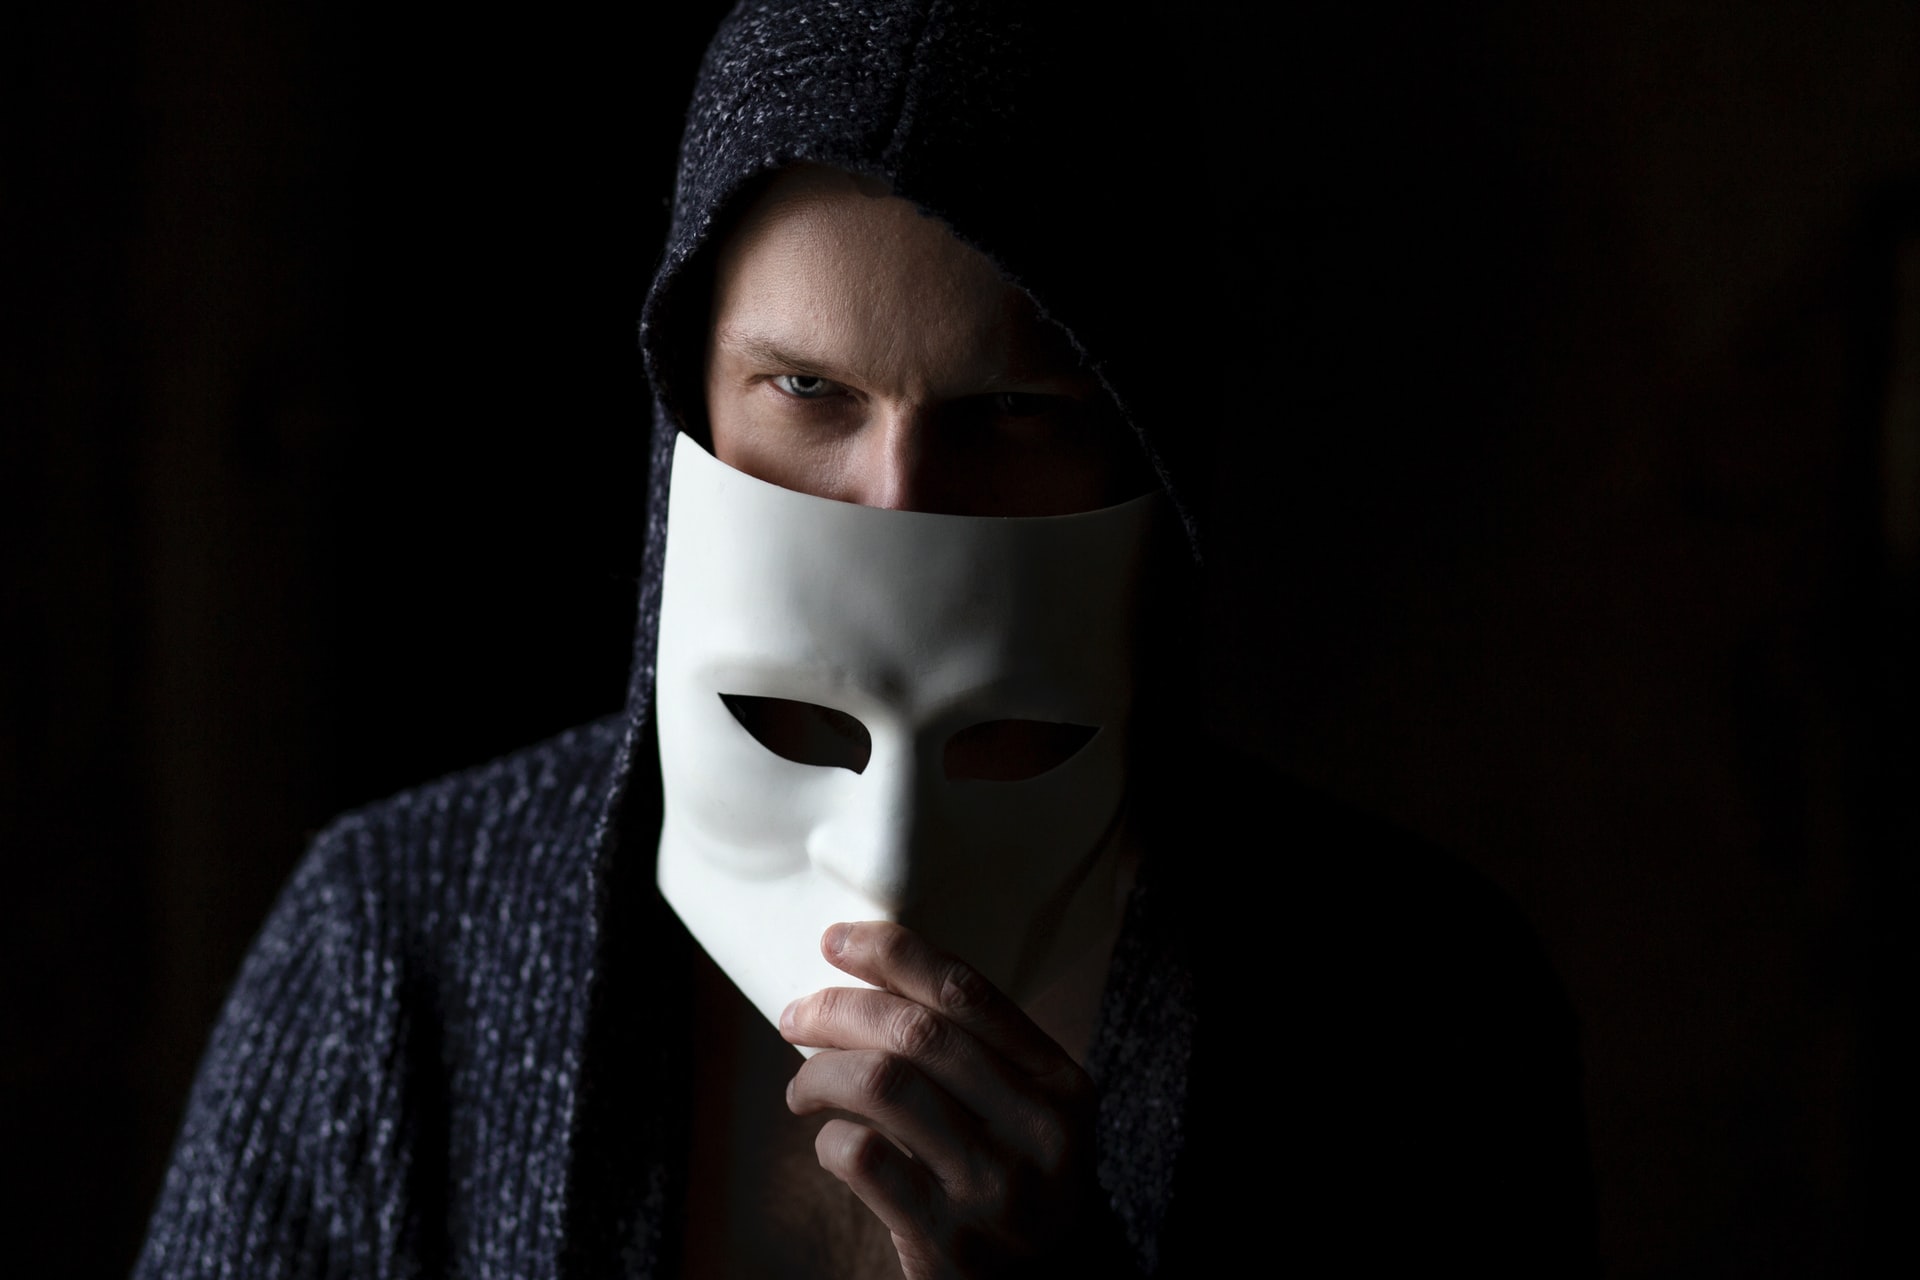 a man in a black hood against a black background with a white mask half covering his face looking sinister